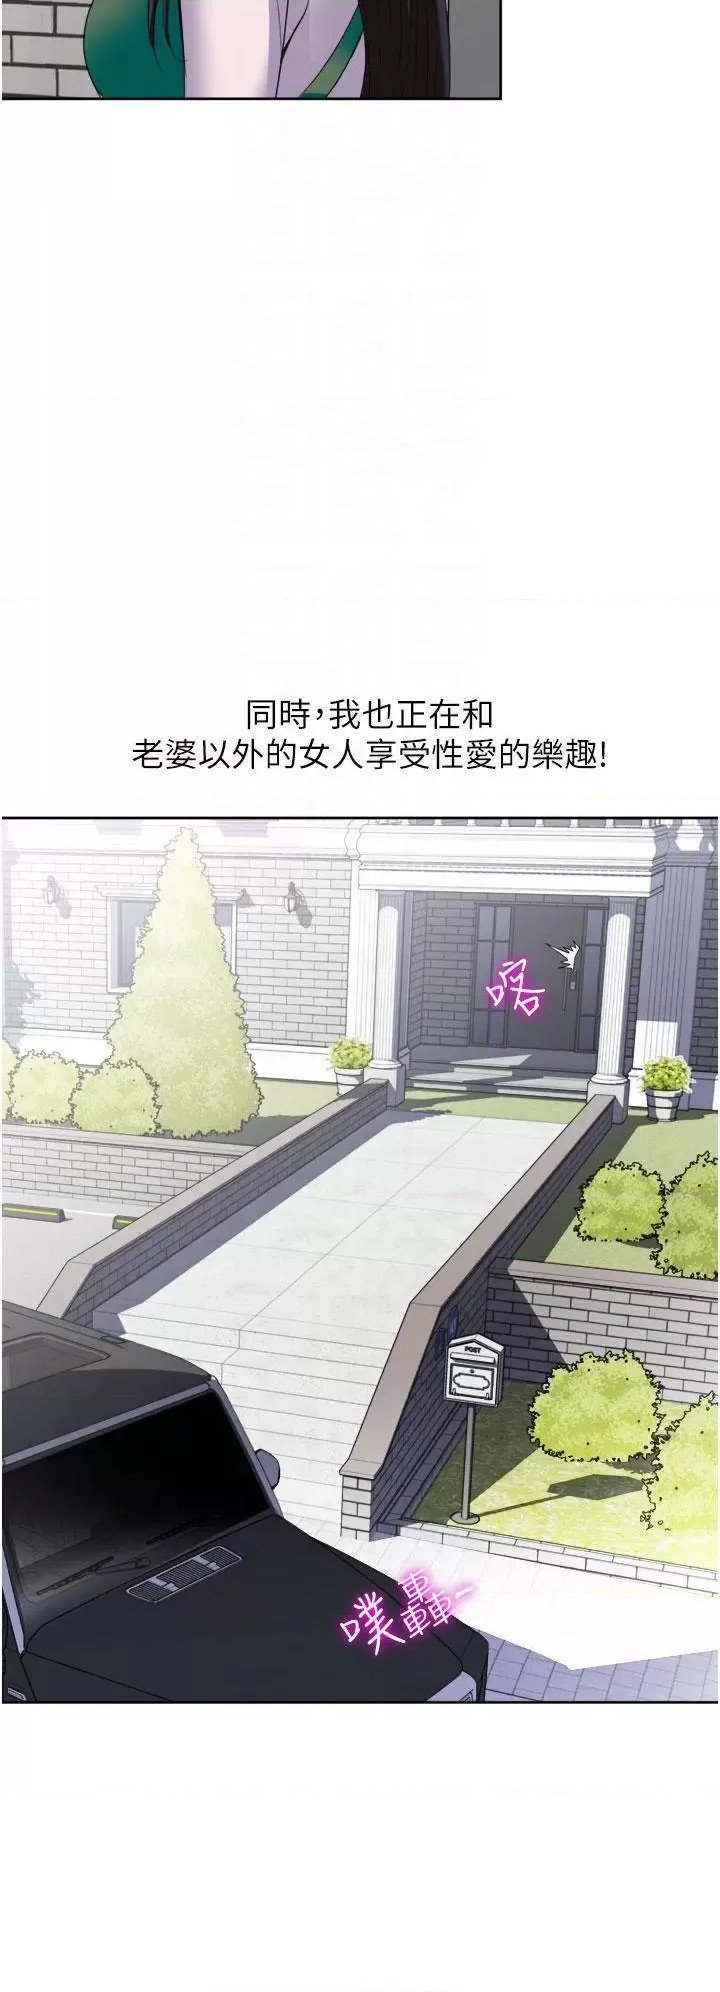 just-once-raw-chap-24-17